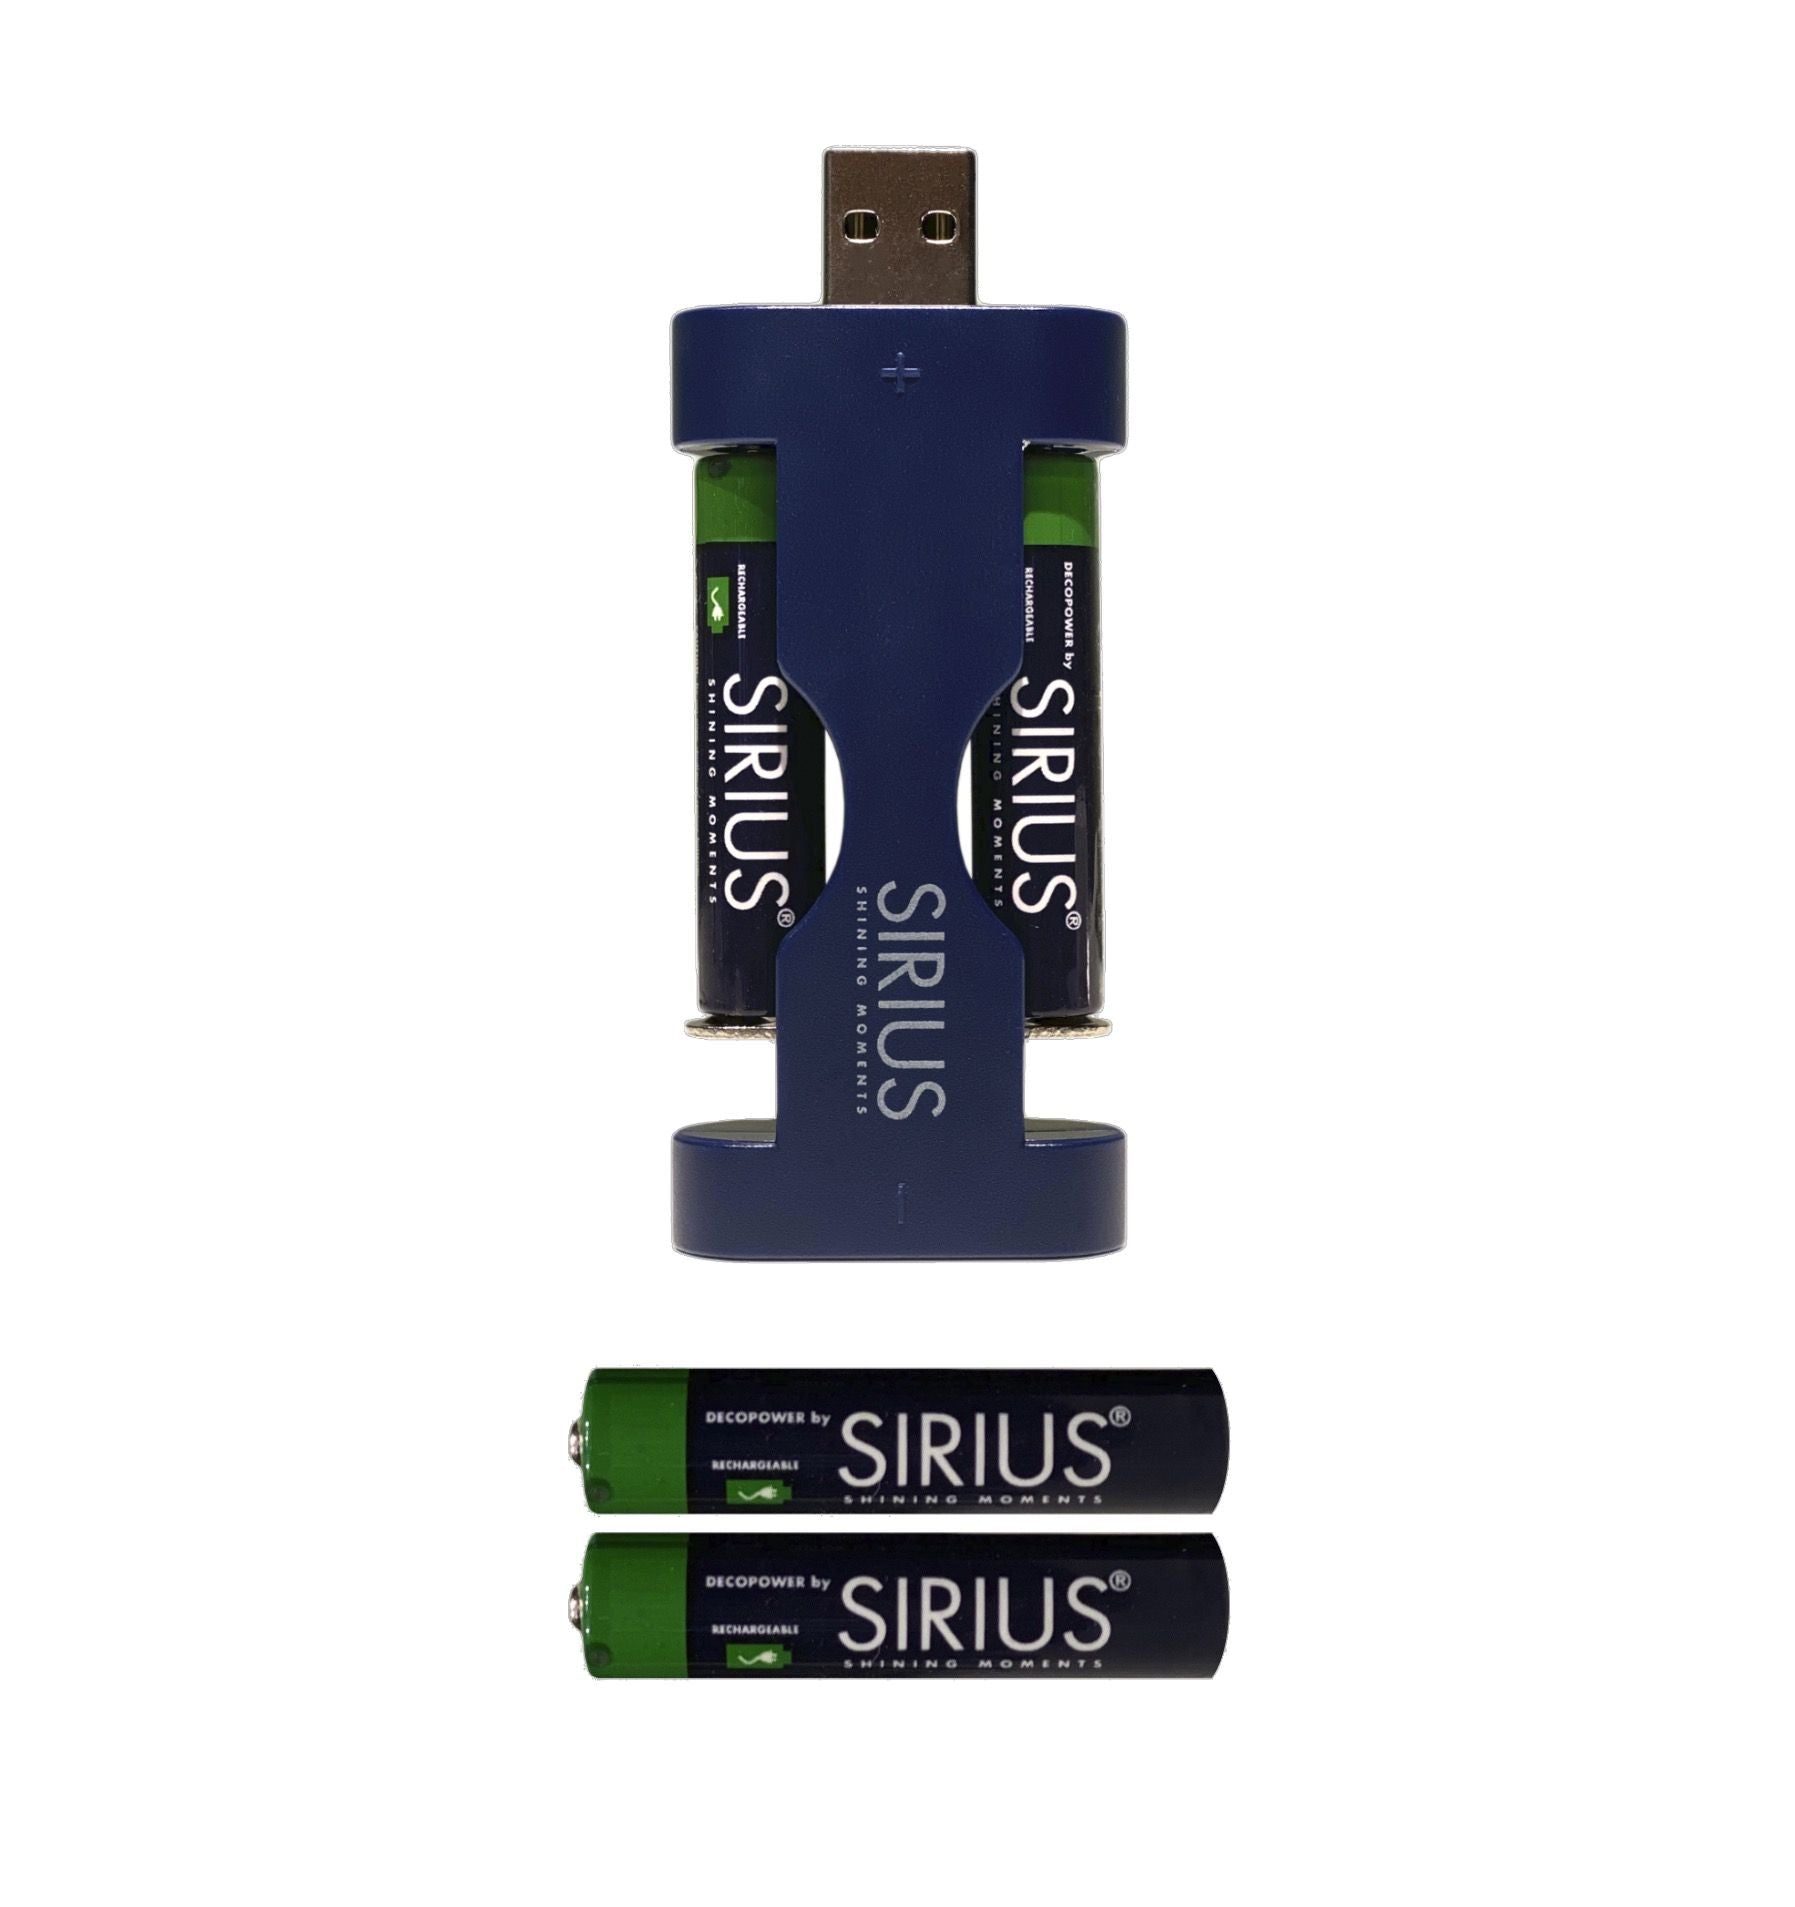 Sirius déco Power USB Charger incl. 4x batteries rechargeables AAA